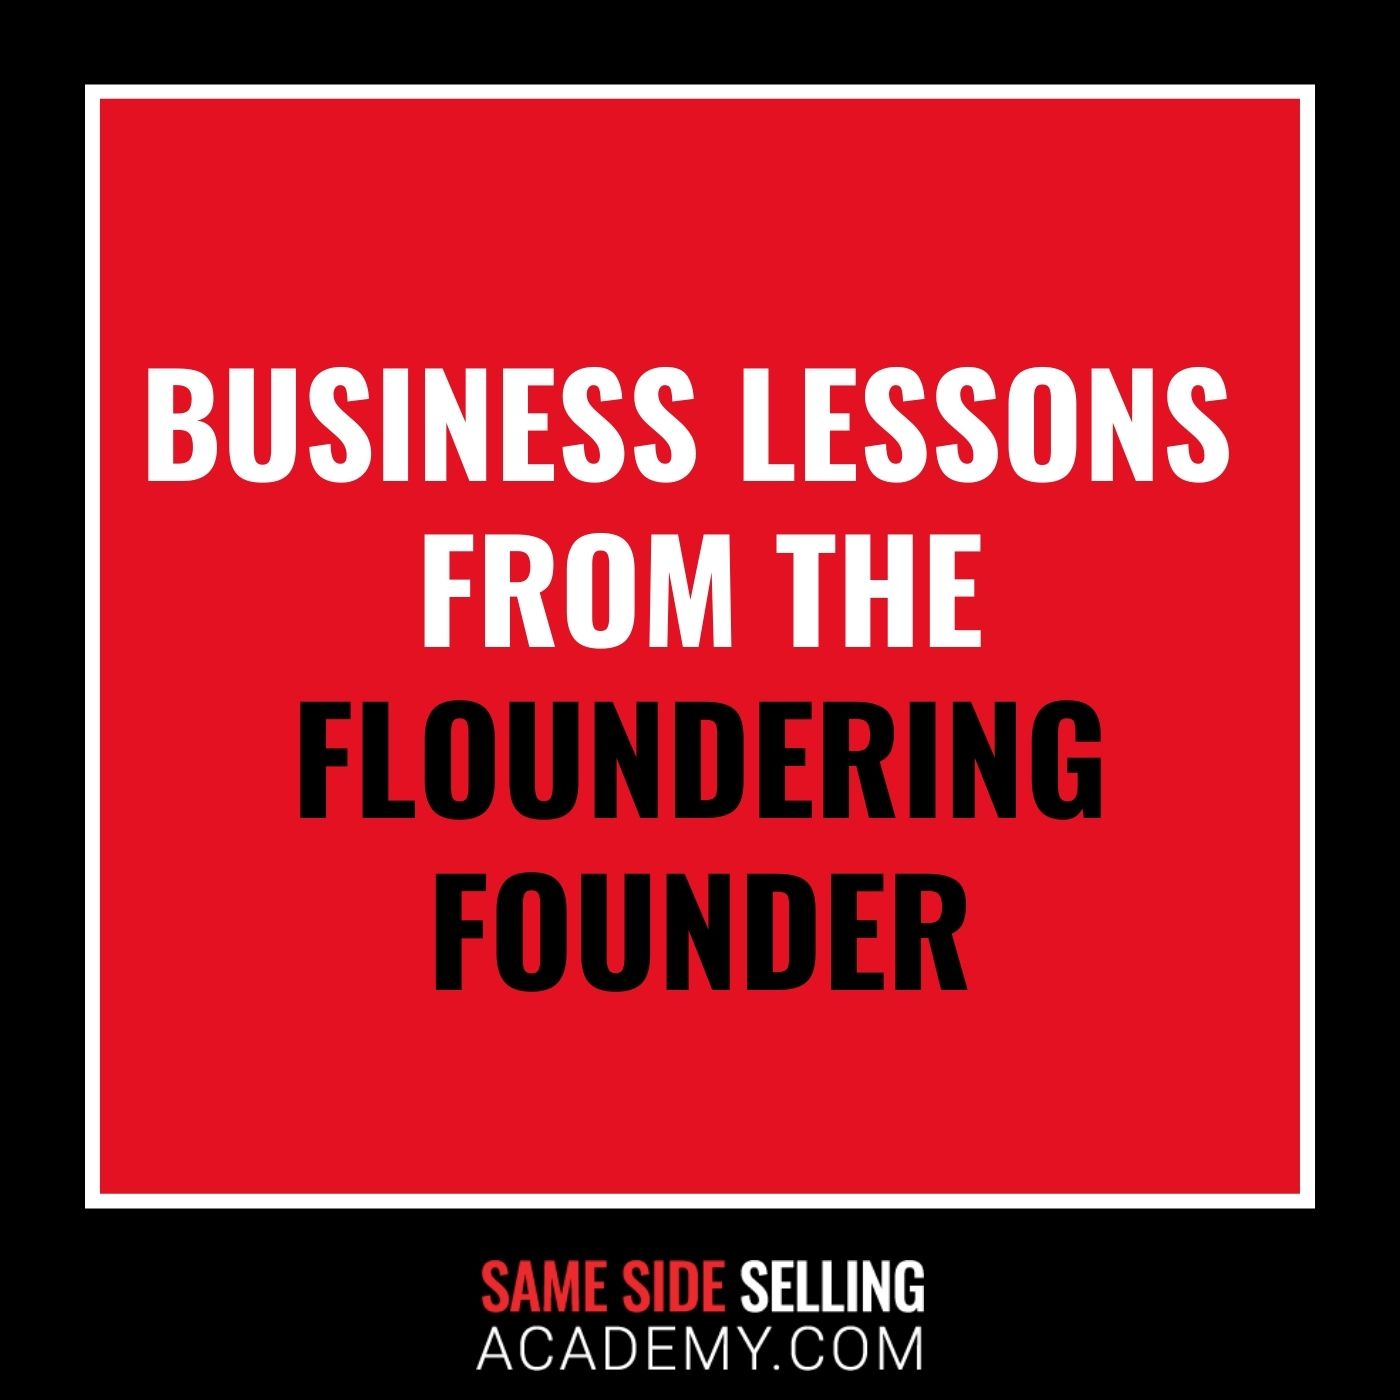 Business Lessons from the Floundering Founder